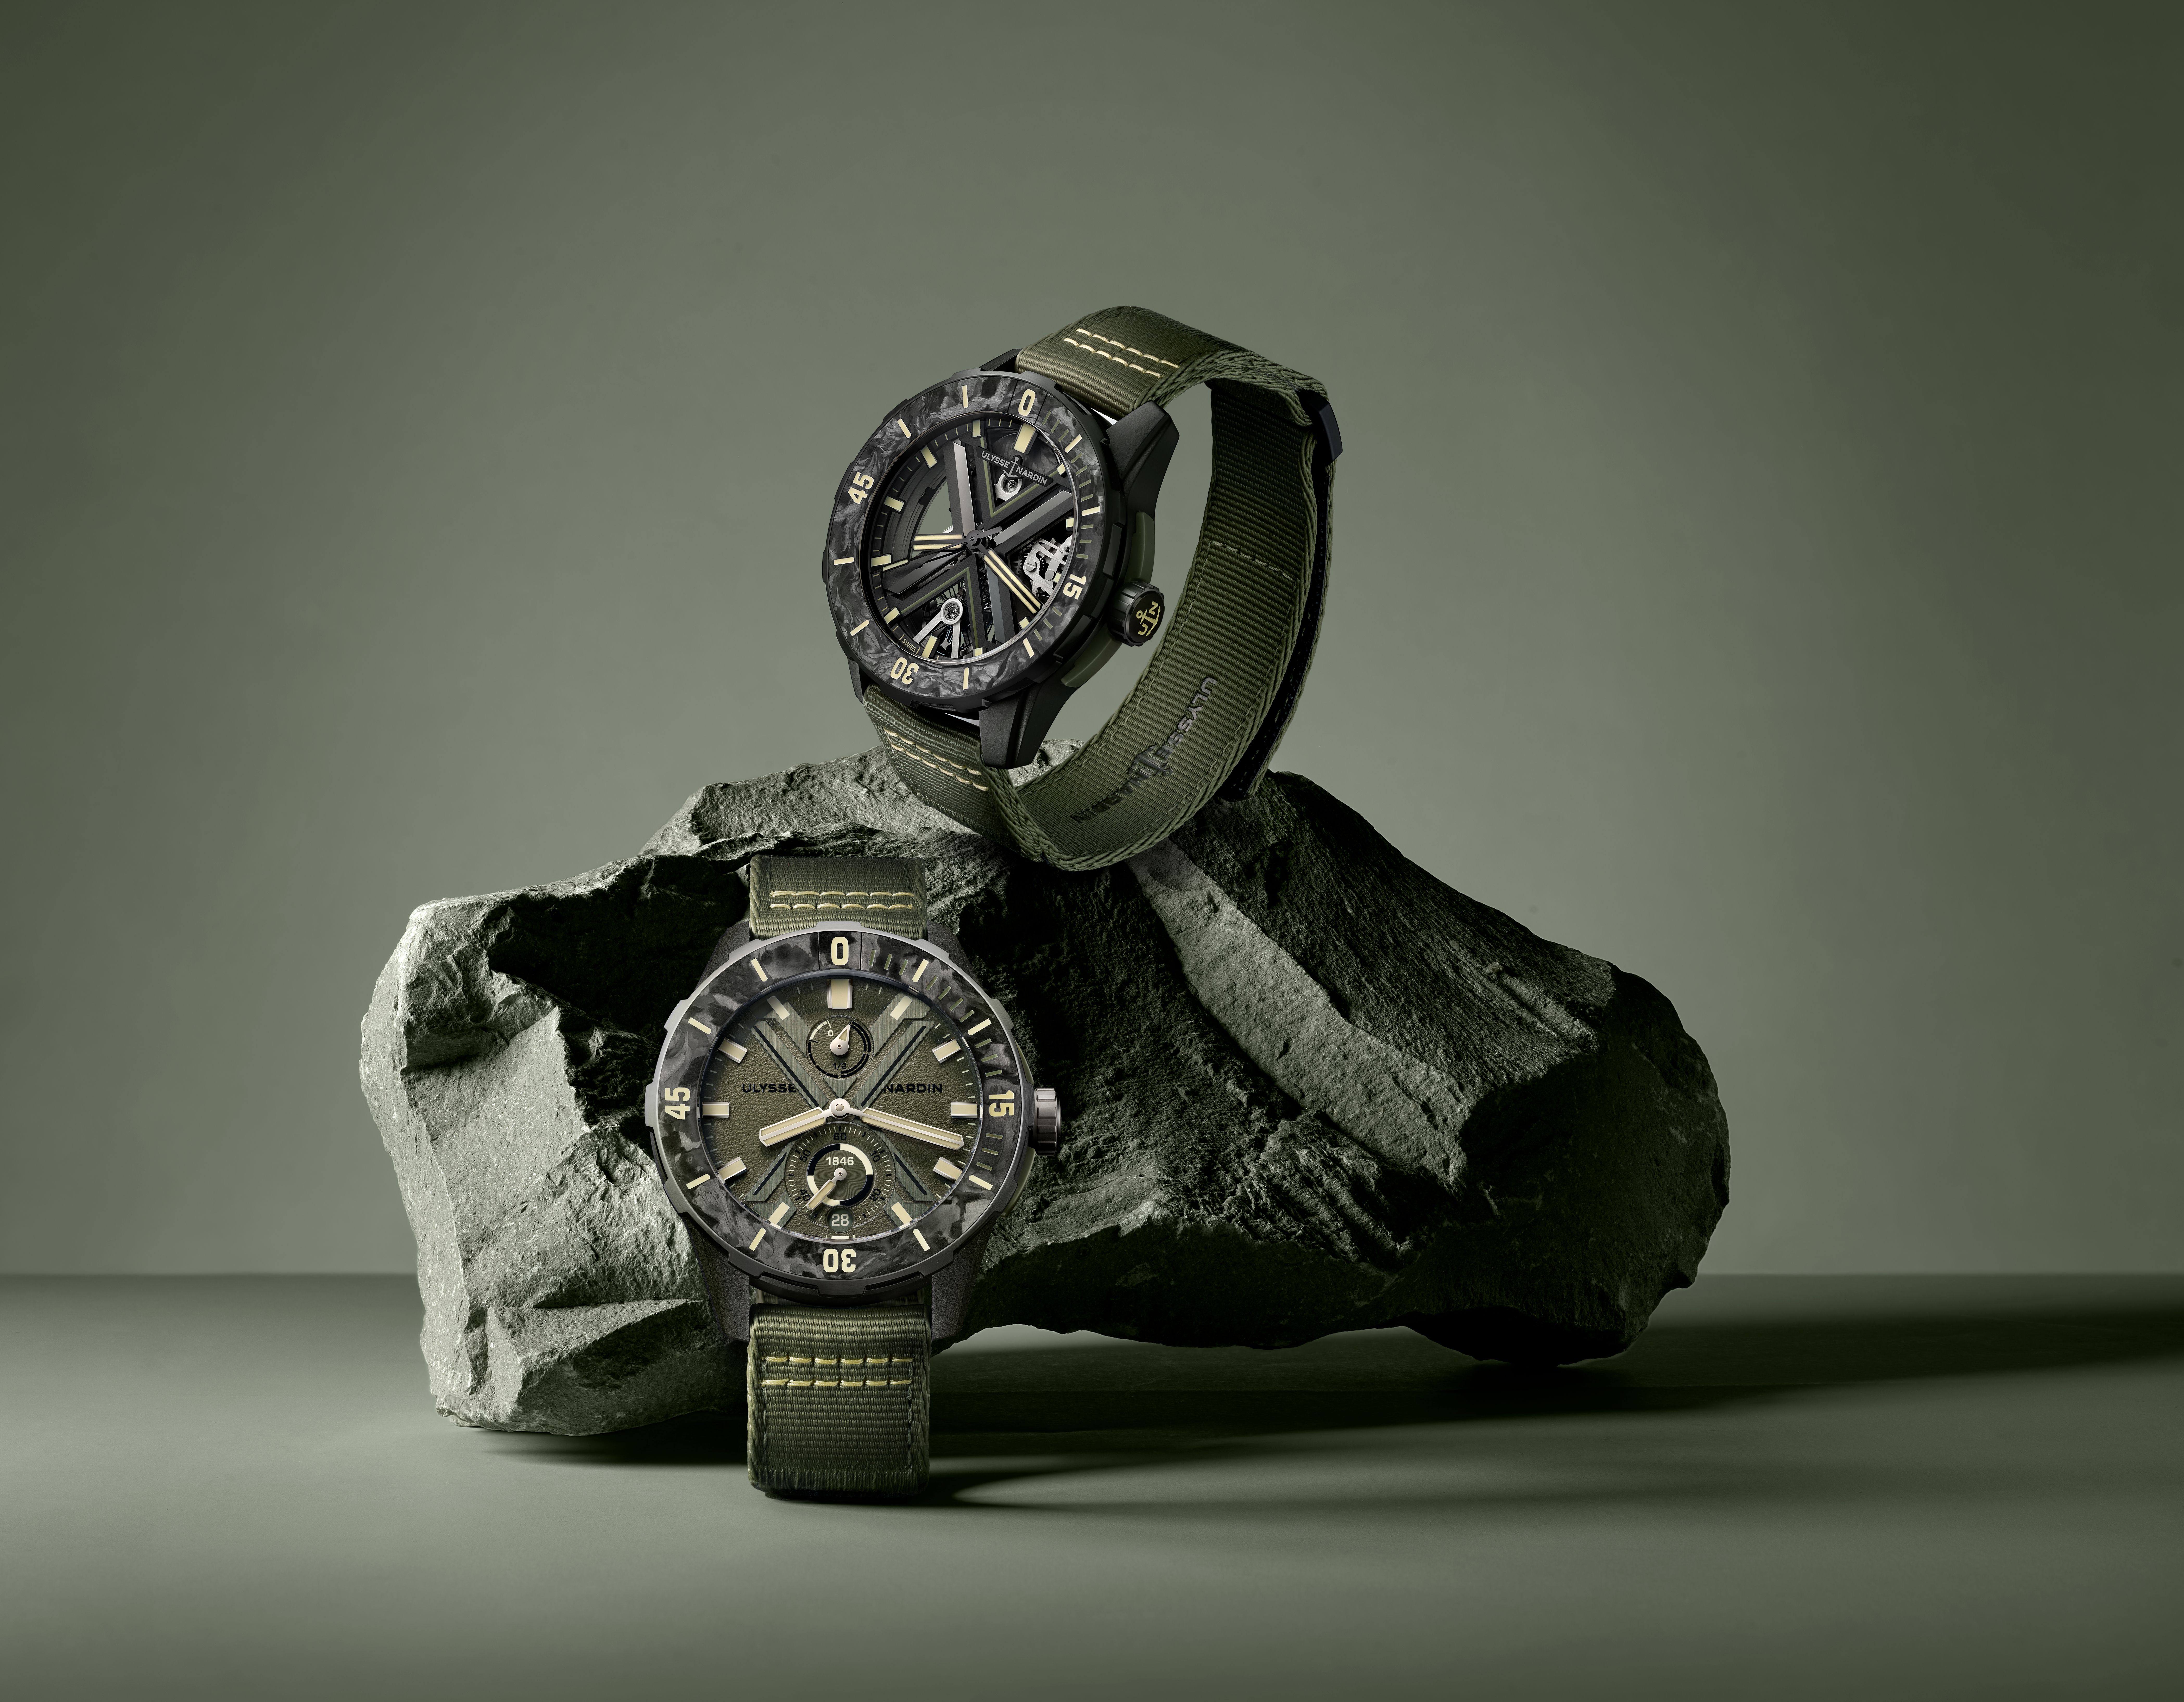 Ulysse Nardin’s Drive For Innovation Results In Two Ultra Dynamic Diver Watches